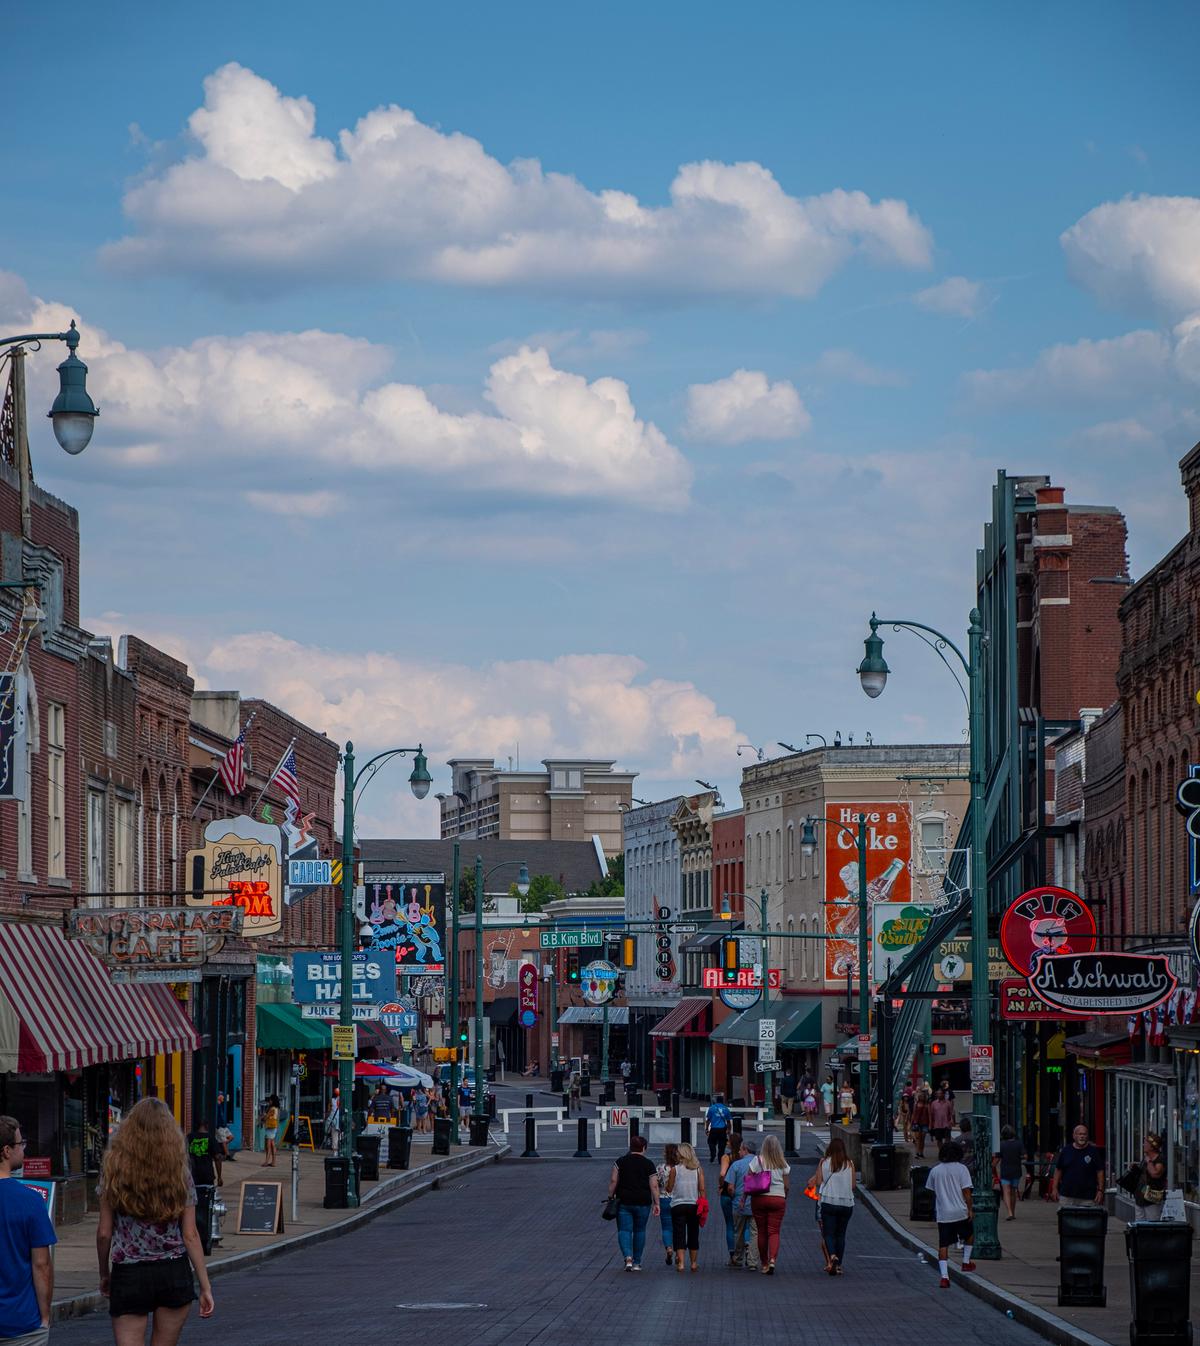 Beale Street is the "home of blues" in Memphis. (Benjamin Myers/TNS)